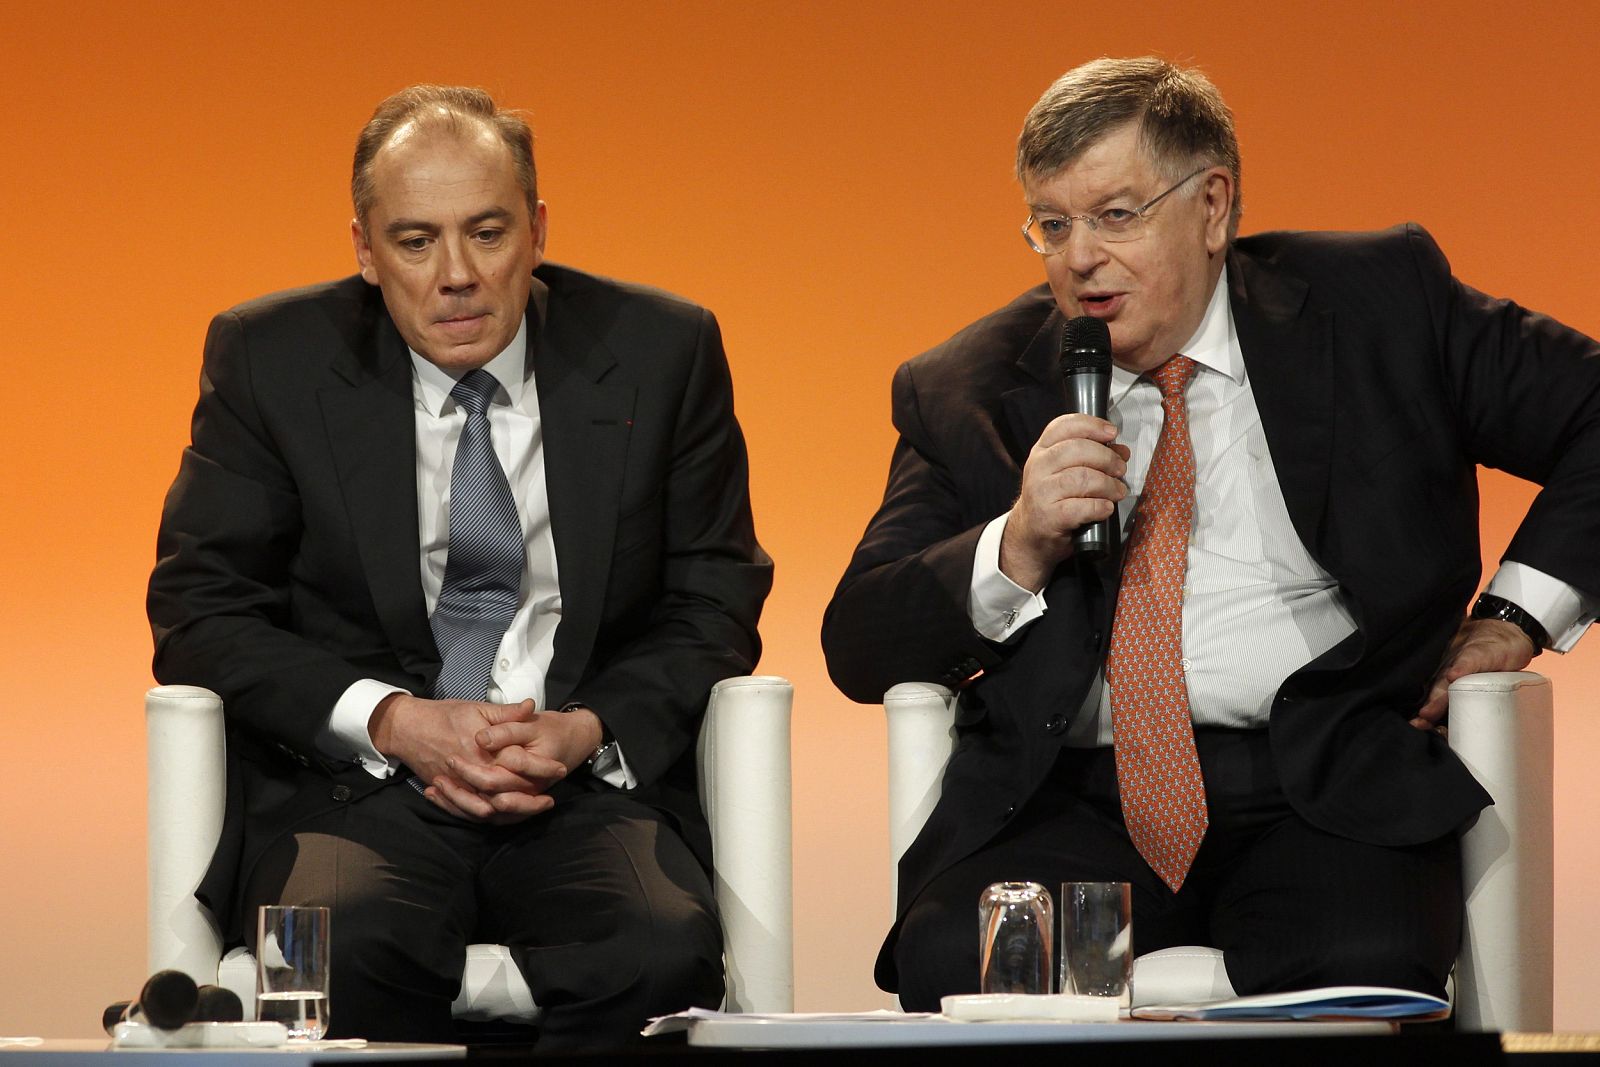 France Telecom's outgoing CEO Lombard and incoming CEO Richard attend a news conference in Paris